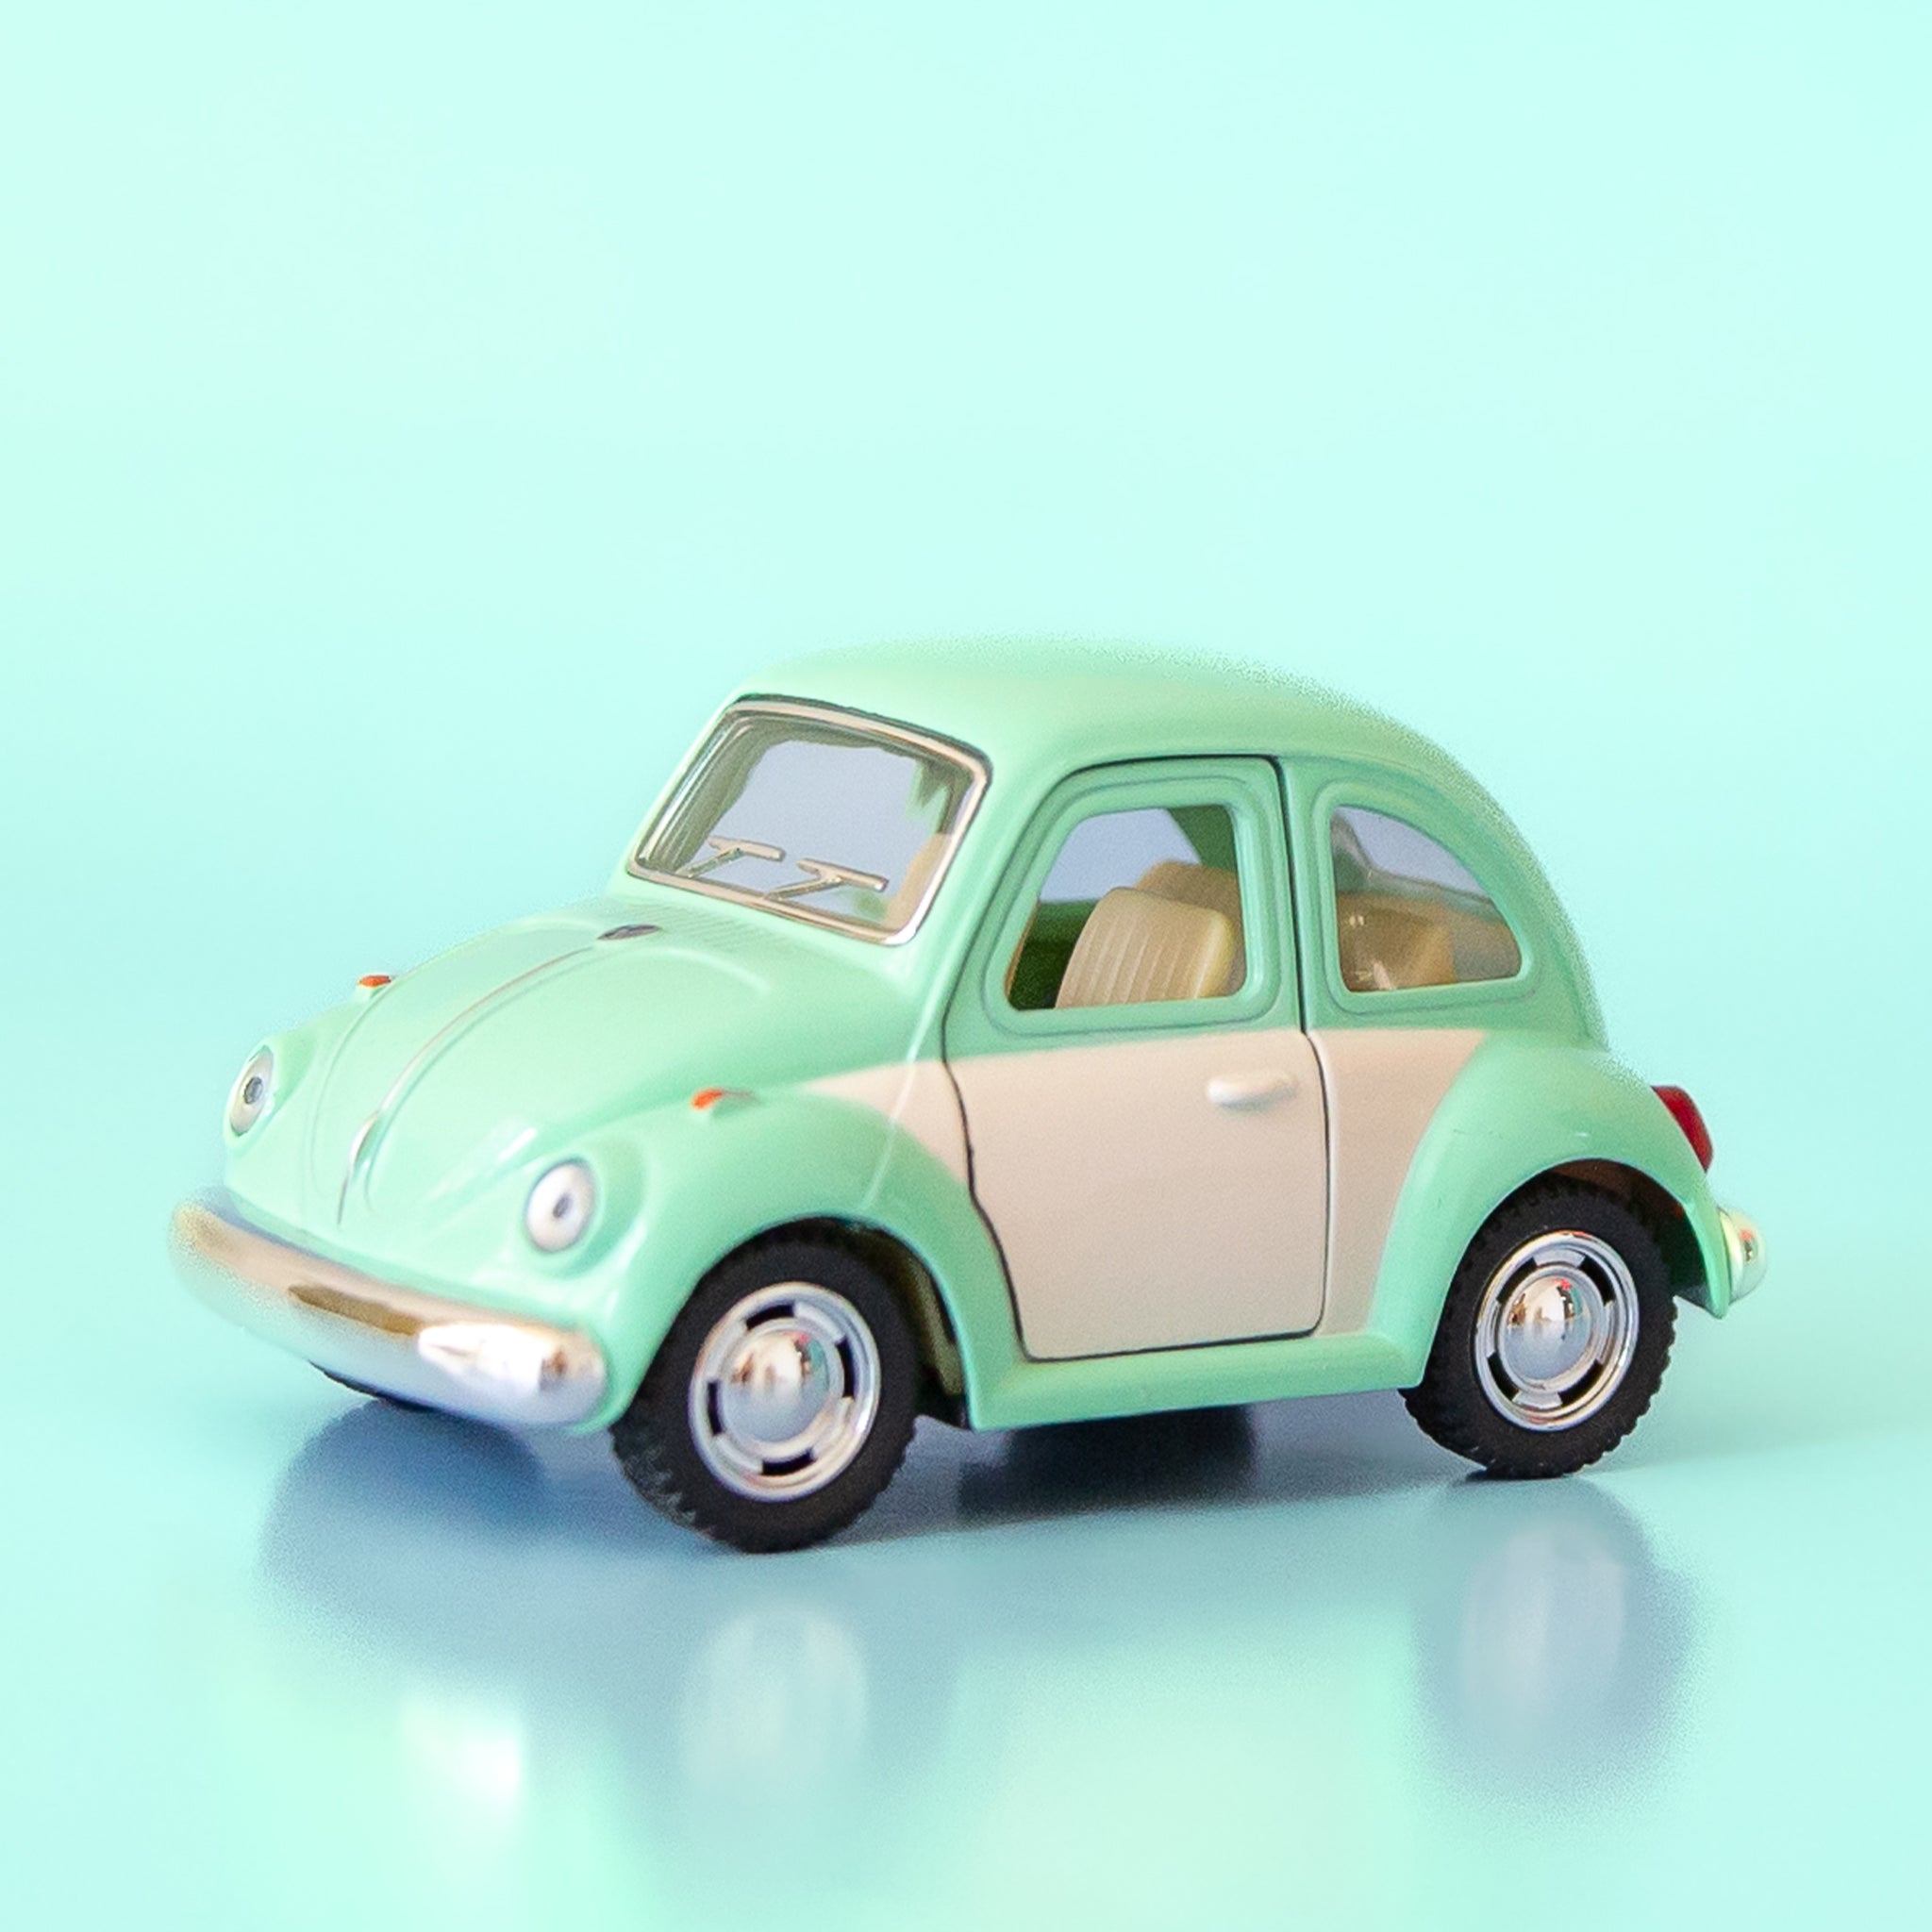 A green and white metal toy car volkswagen beetle. 